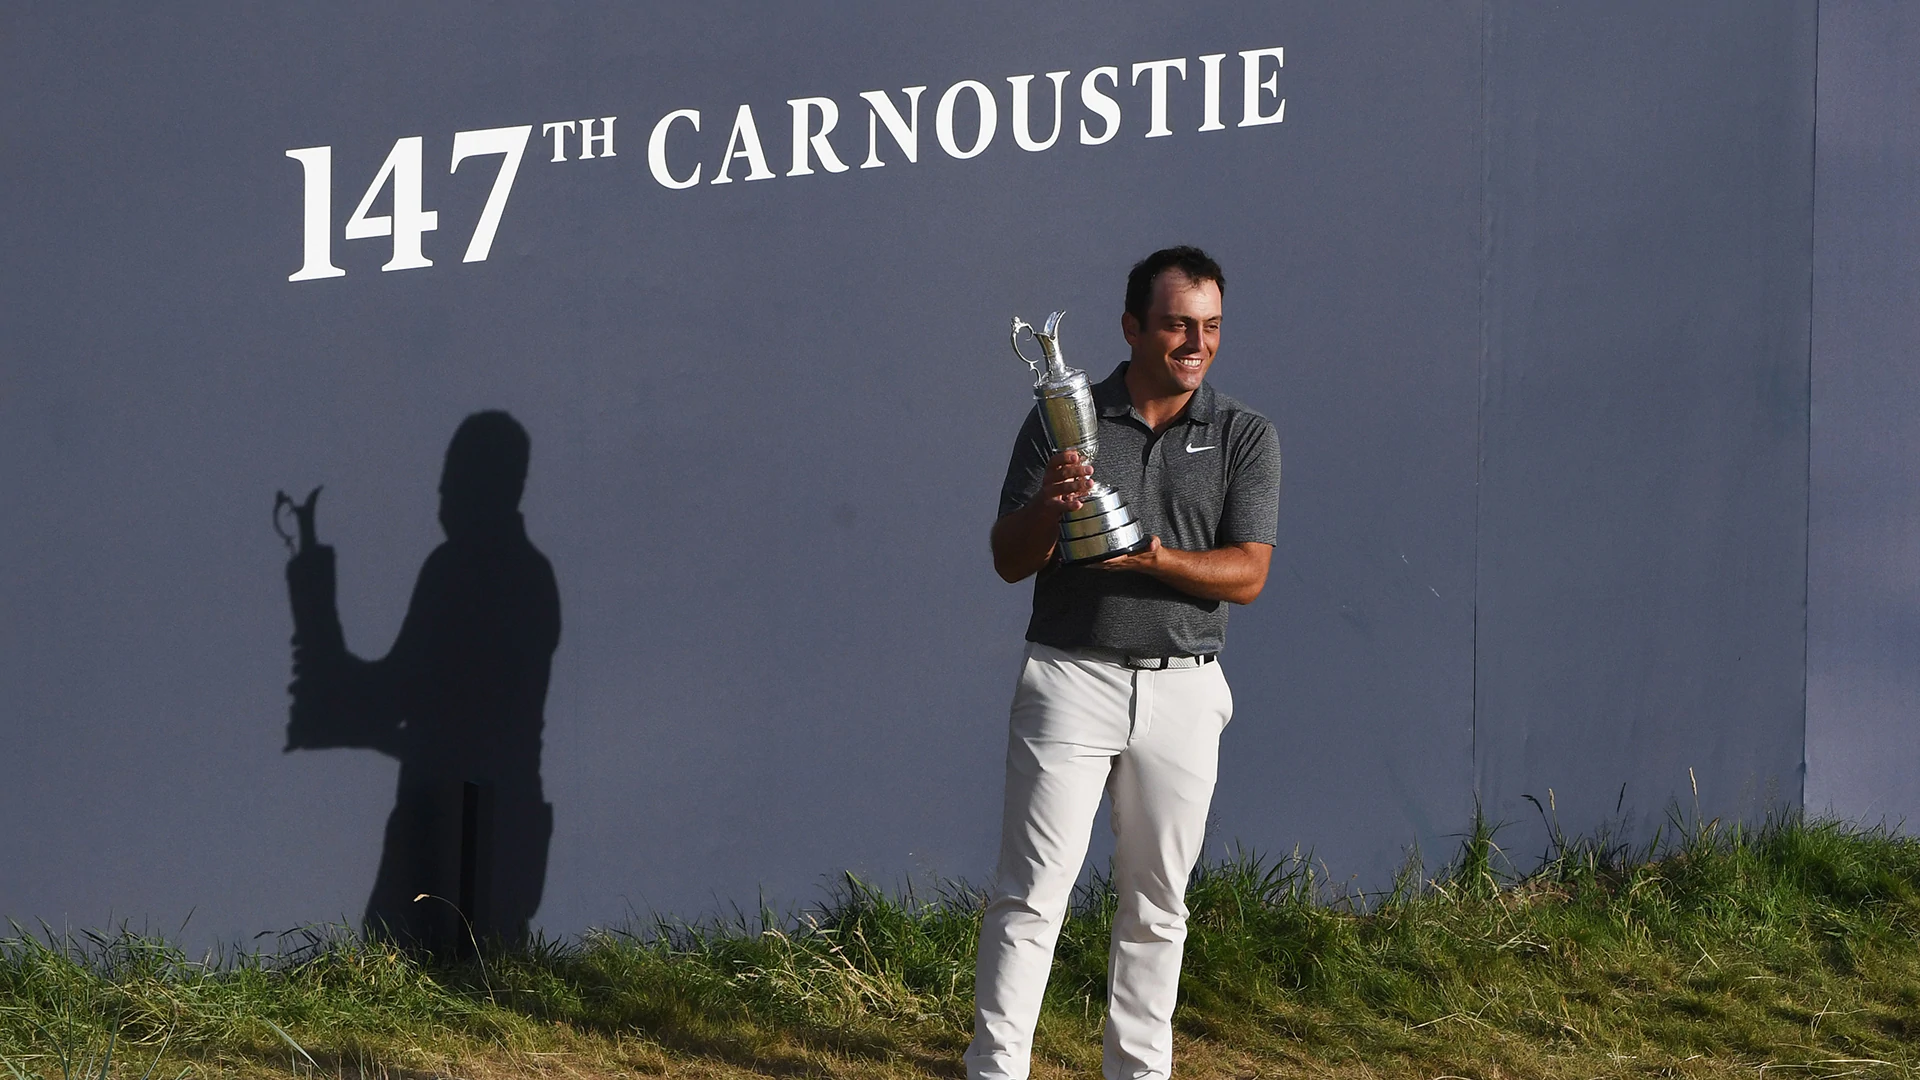 Molinari had previously avoided Carnoustie on purpose